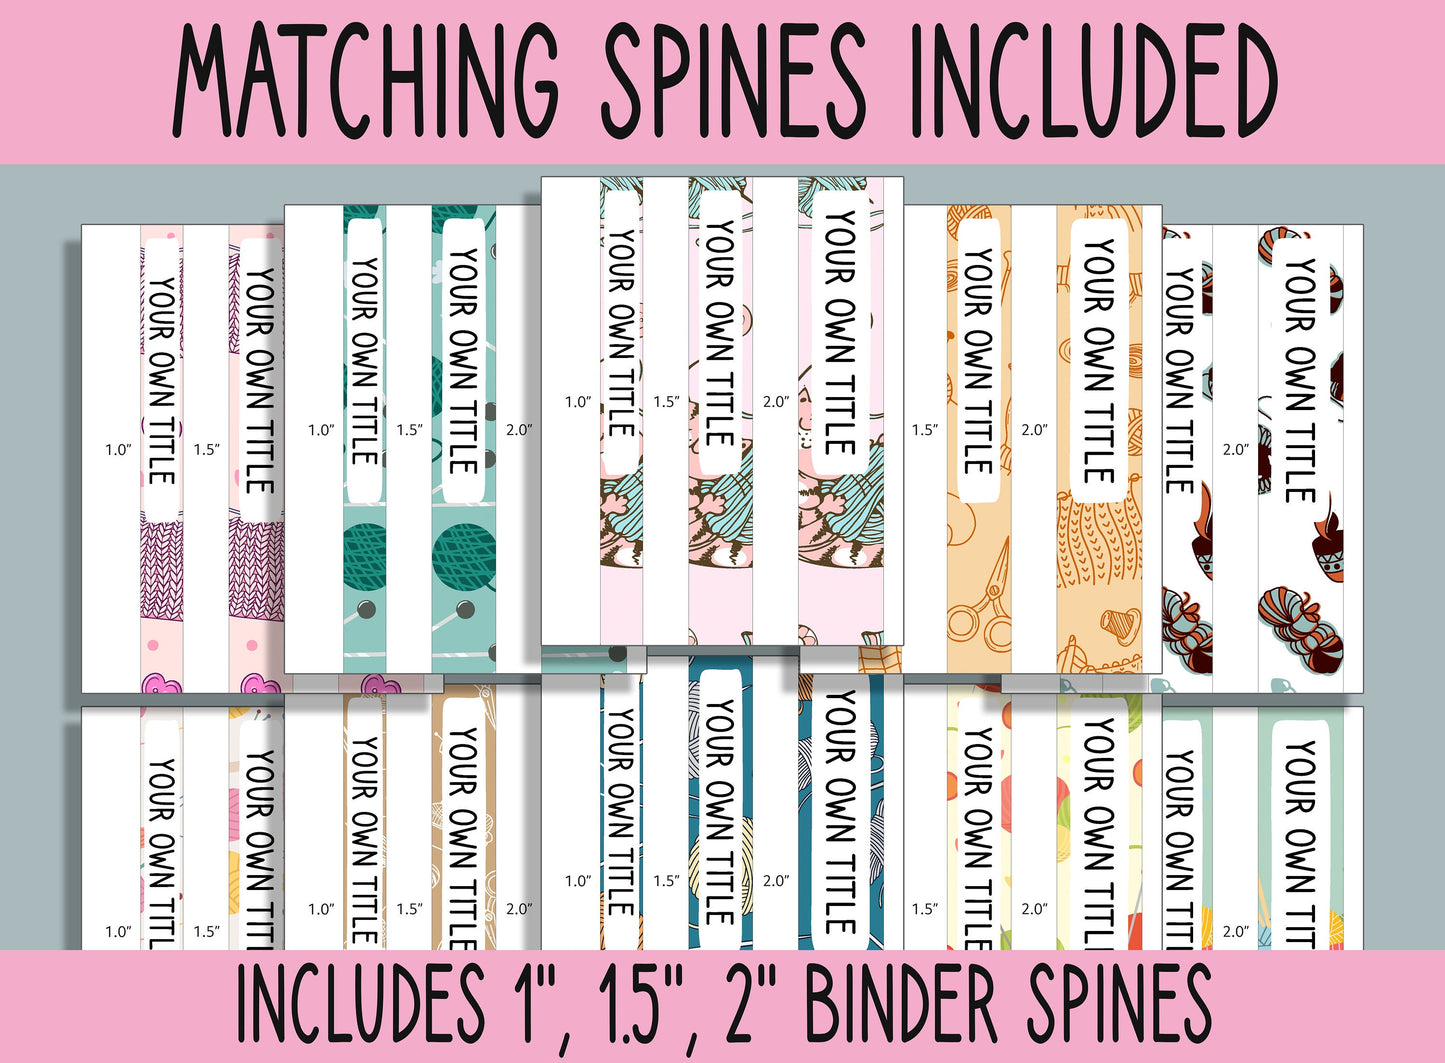 10 Editable Knitting Binder Covers, Includes 1", 1.5", 2" Spines, Available in A4 & US Letter, Editing with PowerPoint or PDF Reader